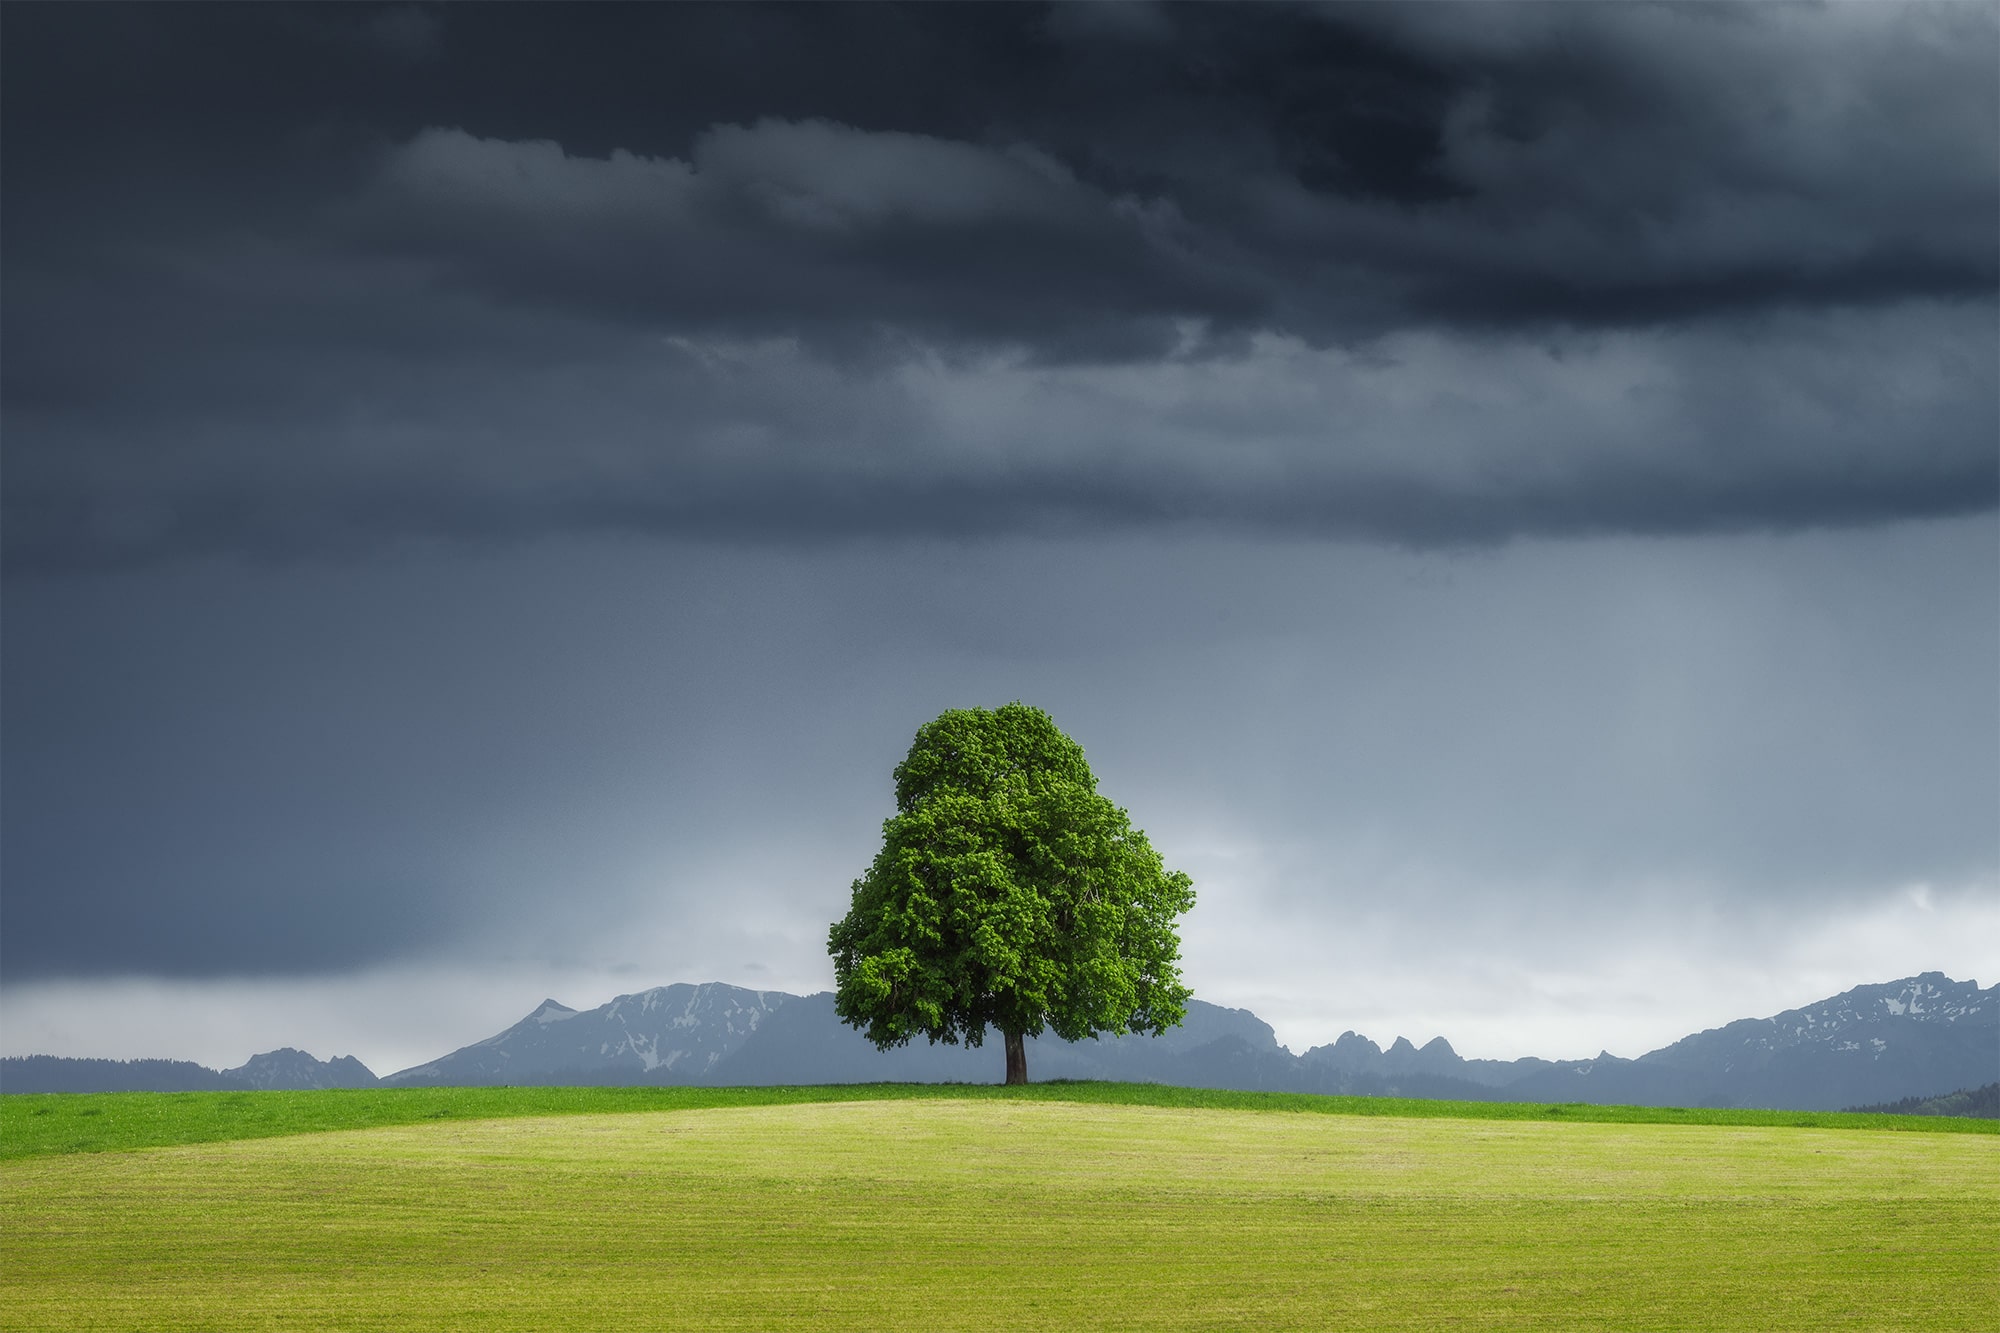 A captivating landscape photograph of a lonely tree atop a hill in Switzerland, Canton Fribourg. The majestic Swiss Alps loom in the background under a dramatic sky. Photo taken with the Nikon Z8.